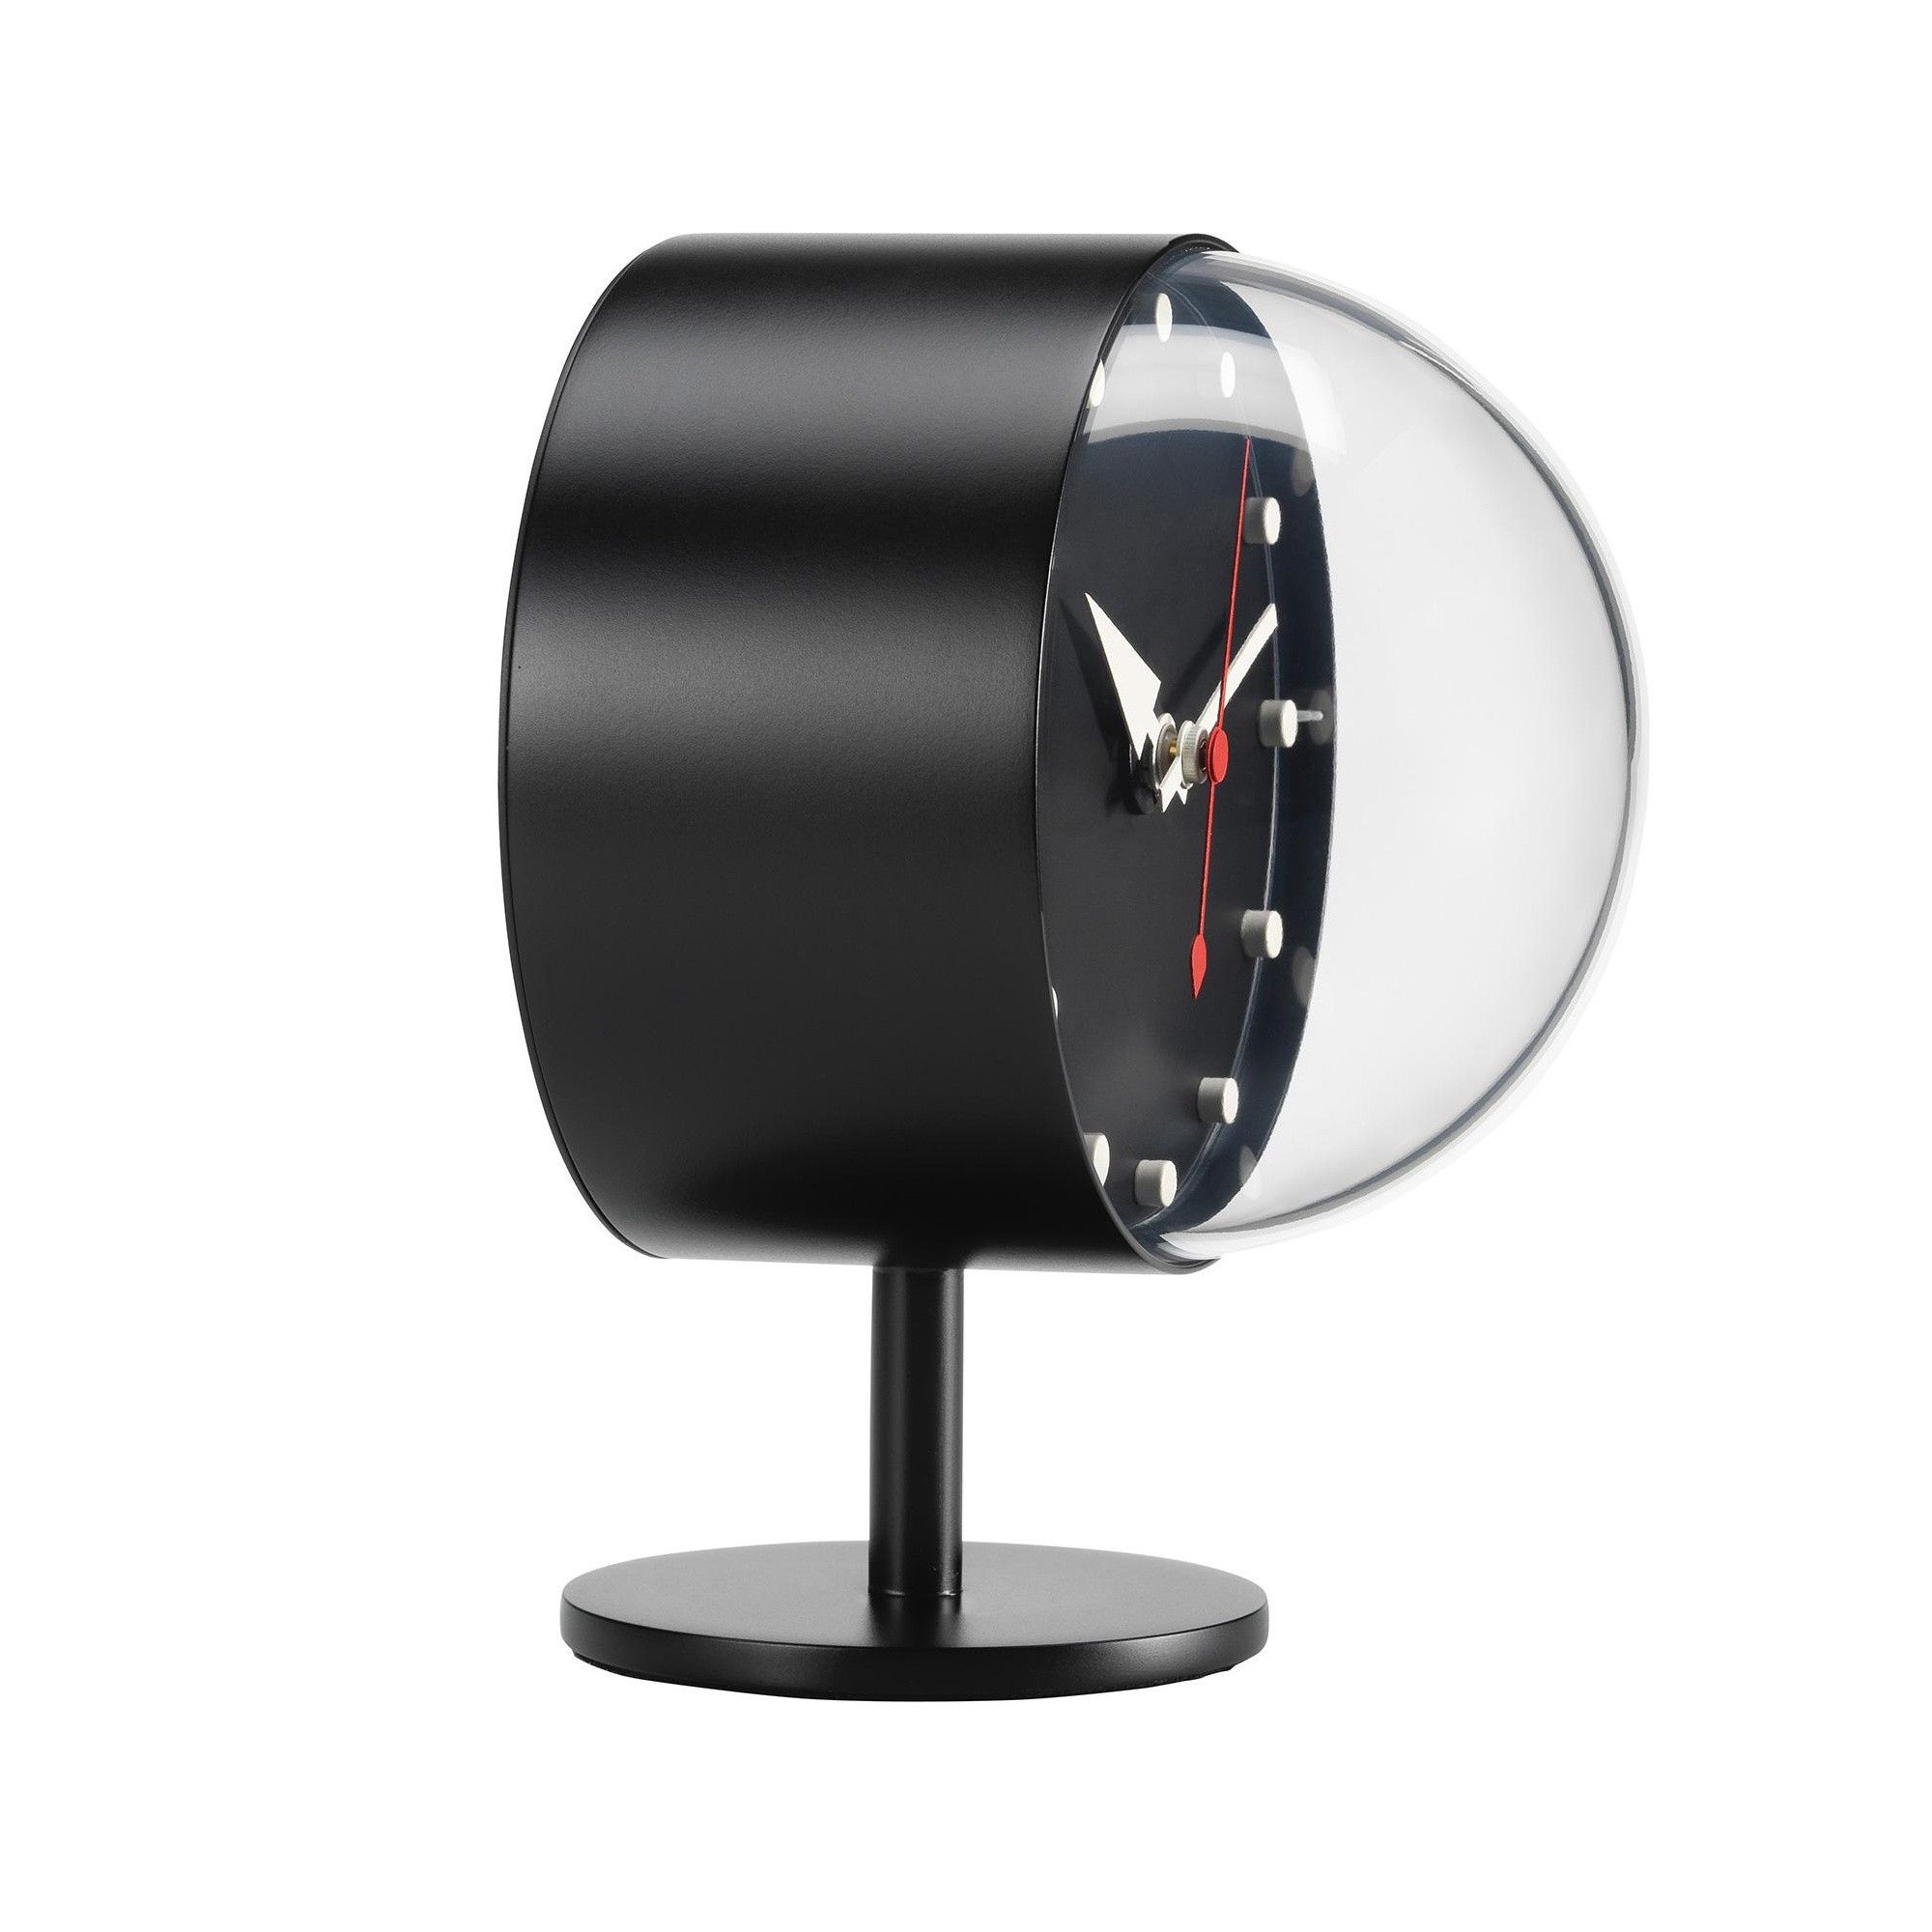 NELSON by Vitra Table Clock